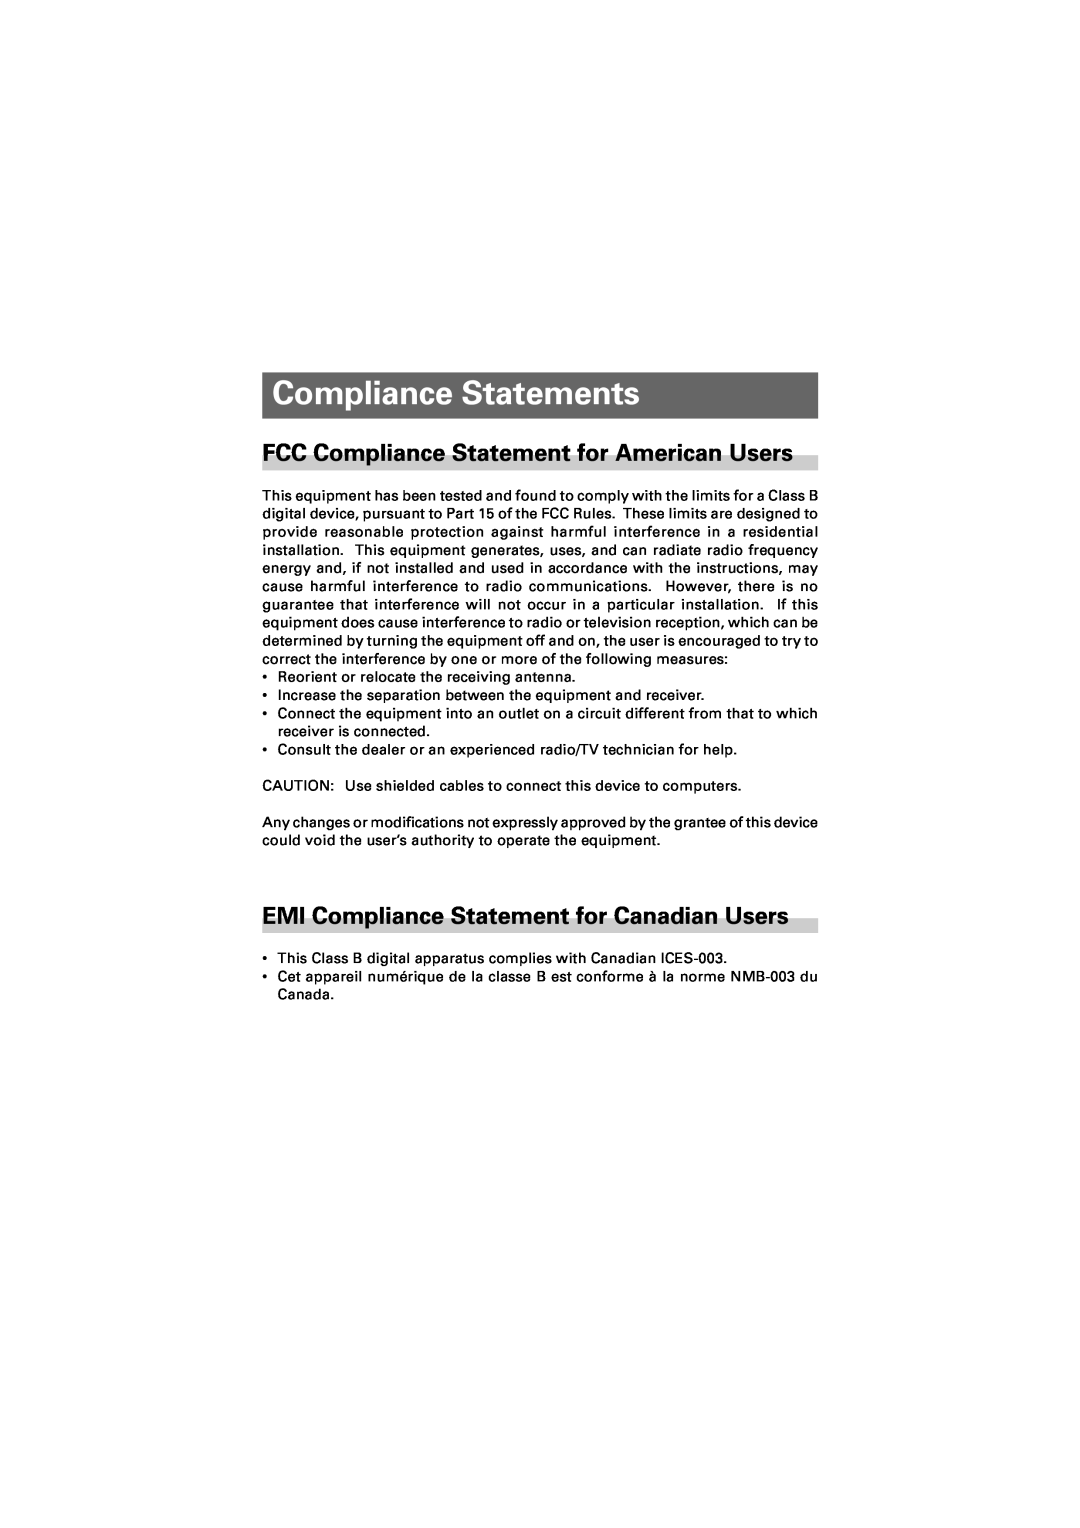 Citizen Systems CMP-10 manual Compliance Statements, FCC Compliance Statement for American Users 